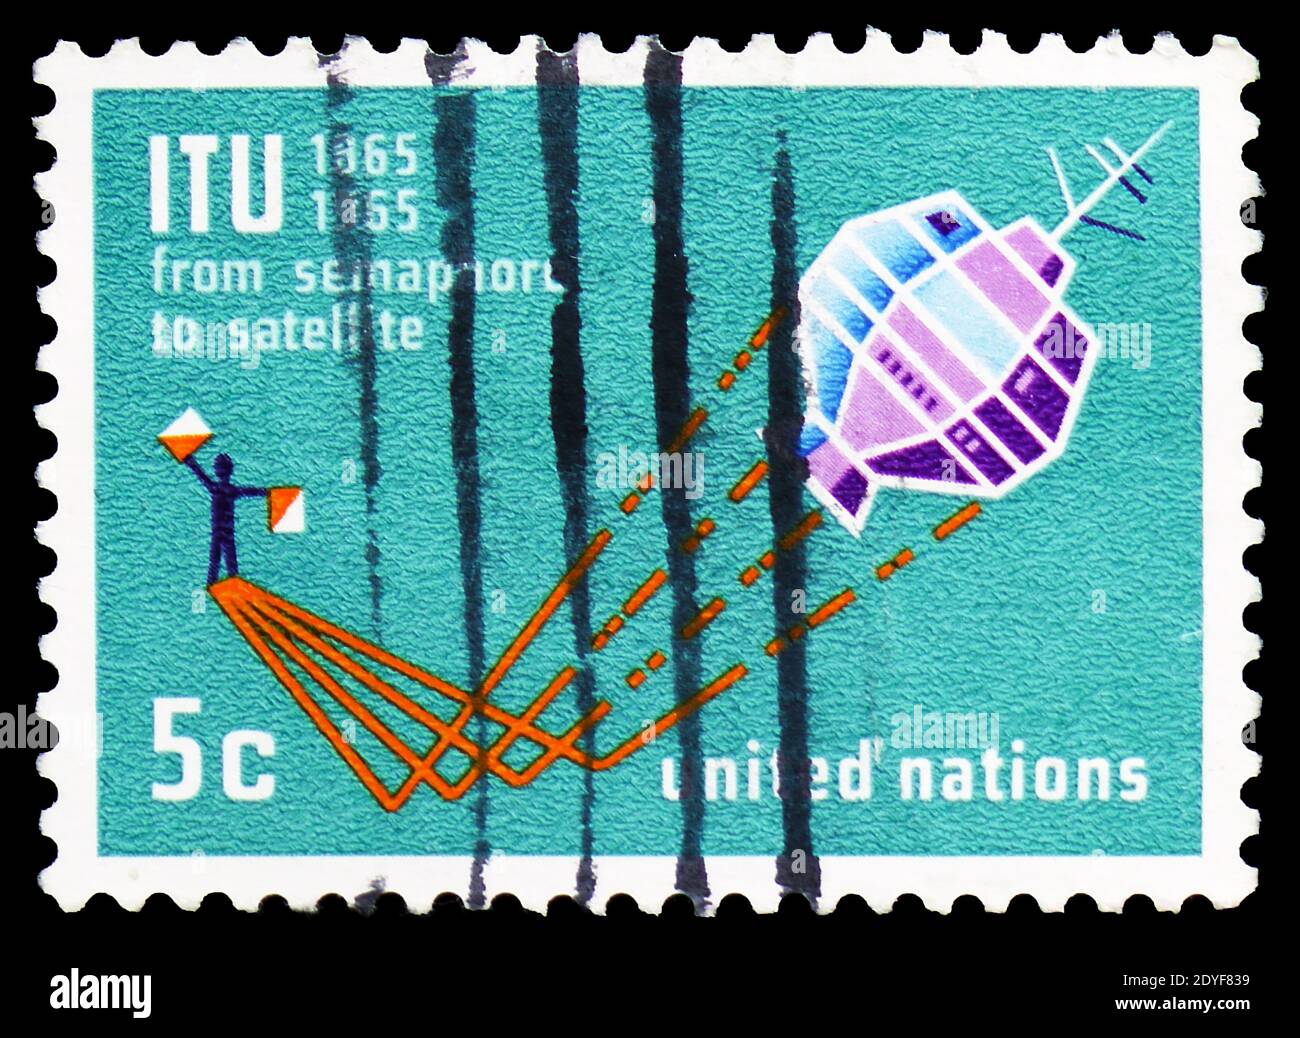 MOSCOW, RUSSIA - MARCH 23, 2019: A stamp printed in UNO New York shows Telstar Communications Satellite, ITU serie, circa 1965 Stock Photo